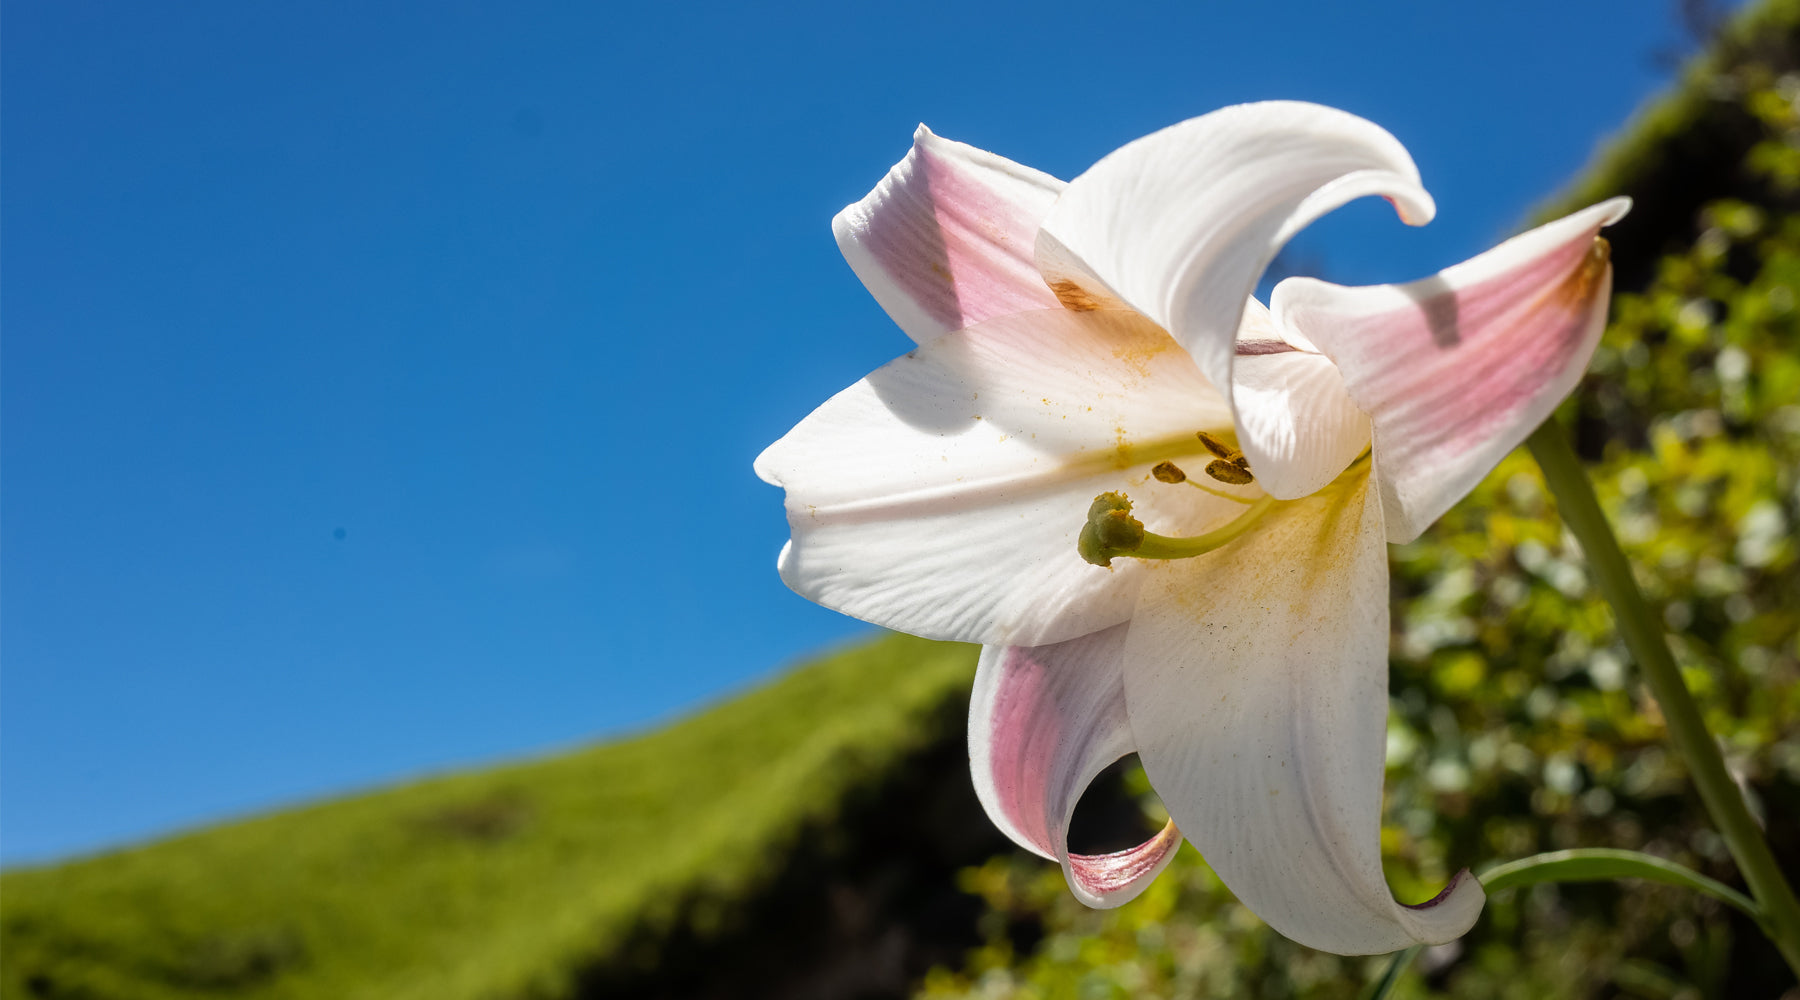 Crinum Latifolium history lily Vietnam How to stop hot flashes fast | Free us shipping | www.crilahealth.com 